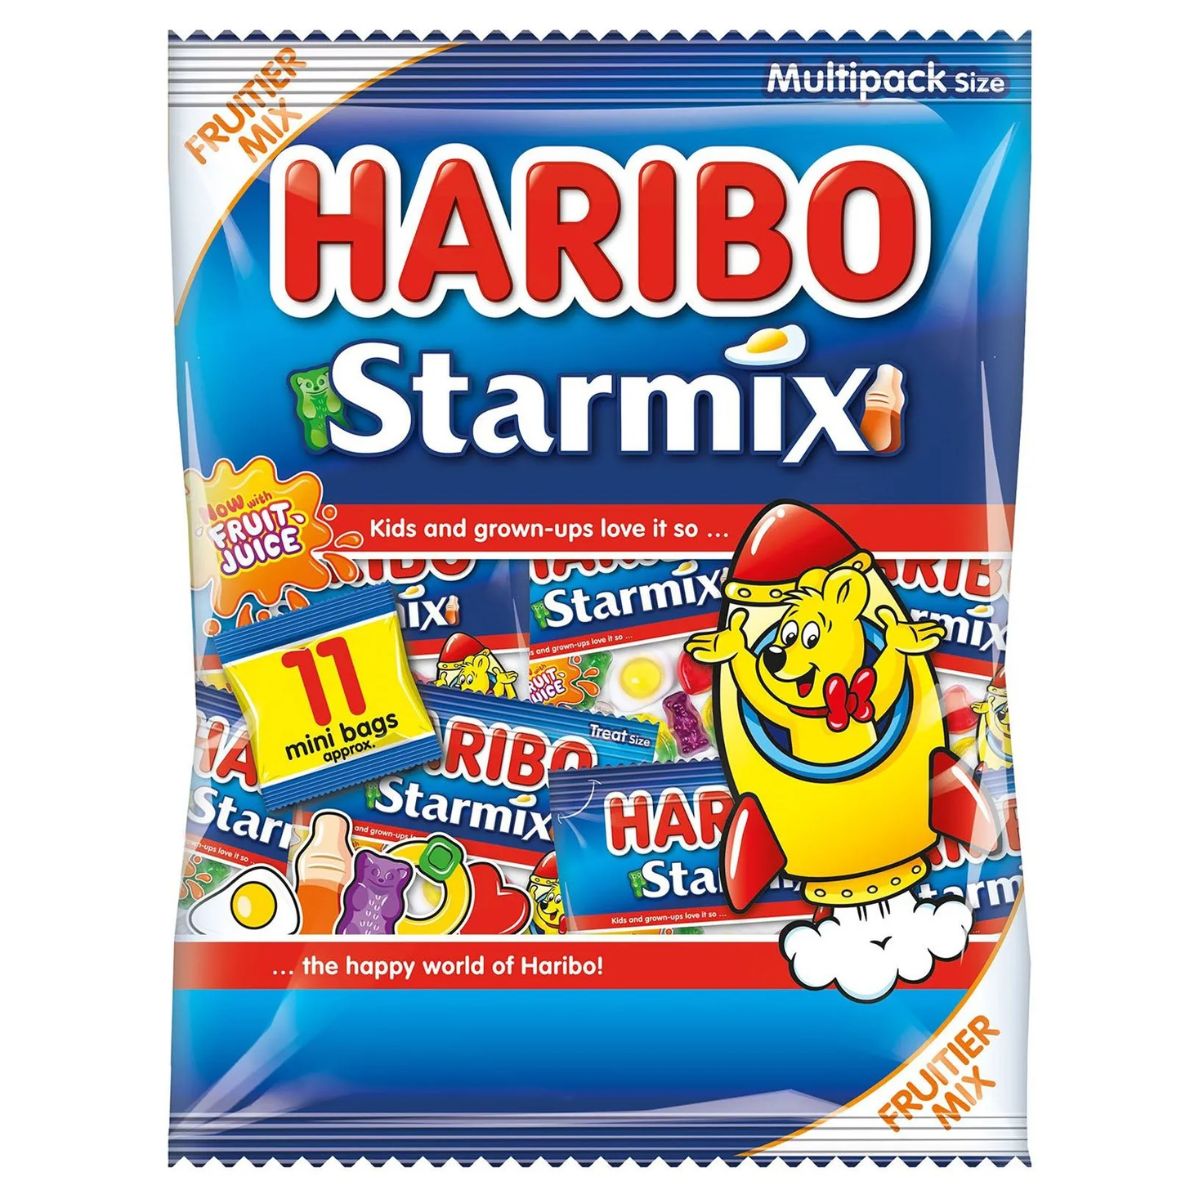 A bag of Haribo - Starmix MultiPack - 176g candy.